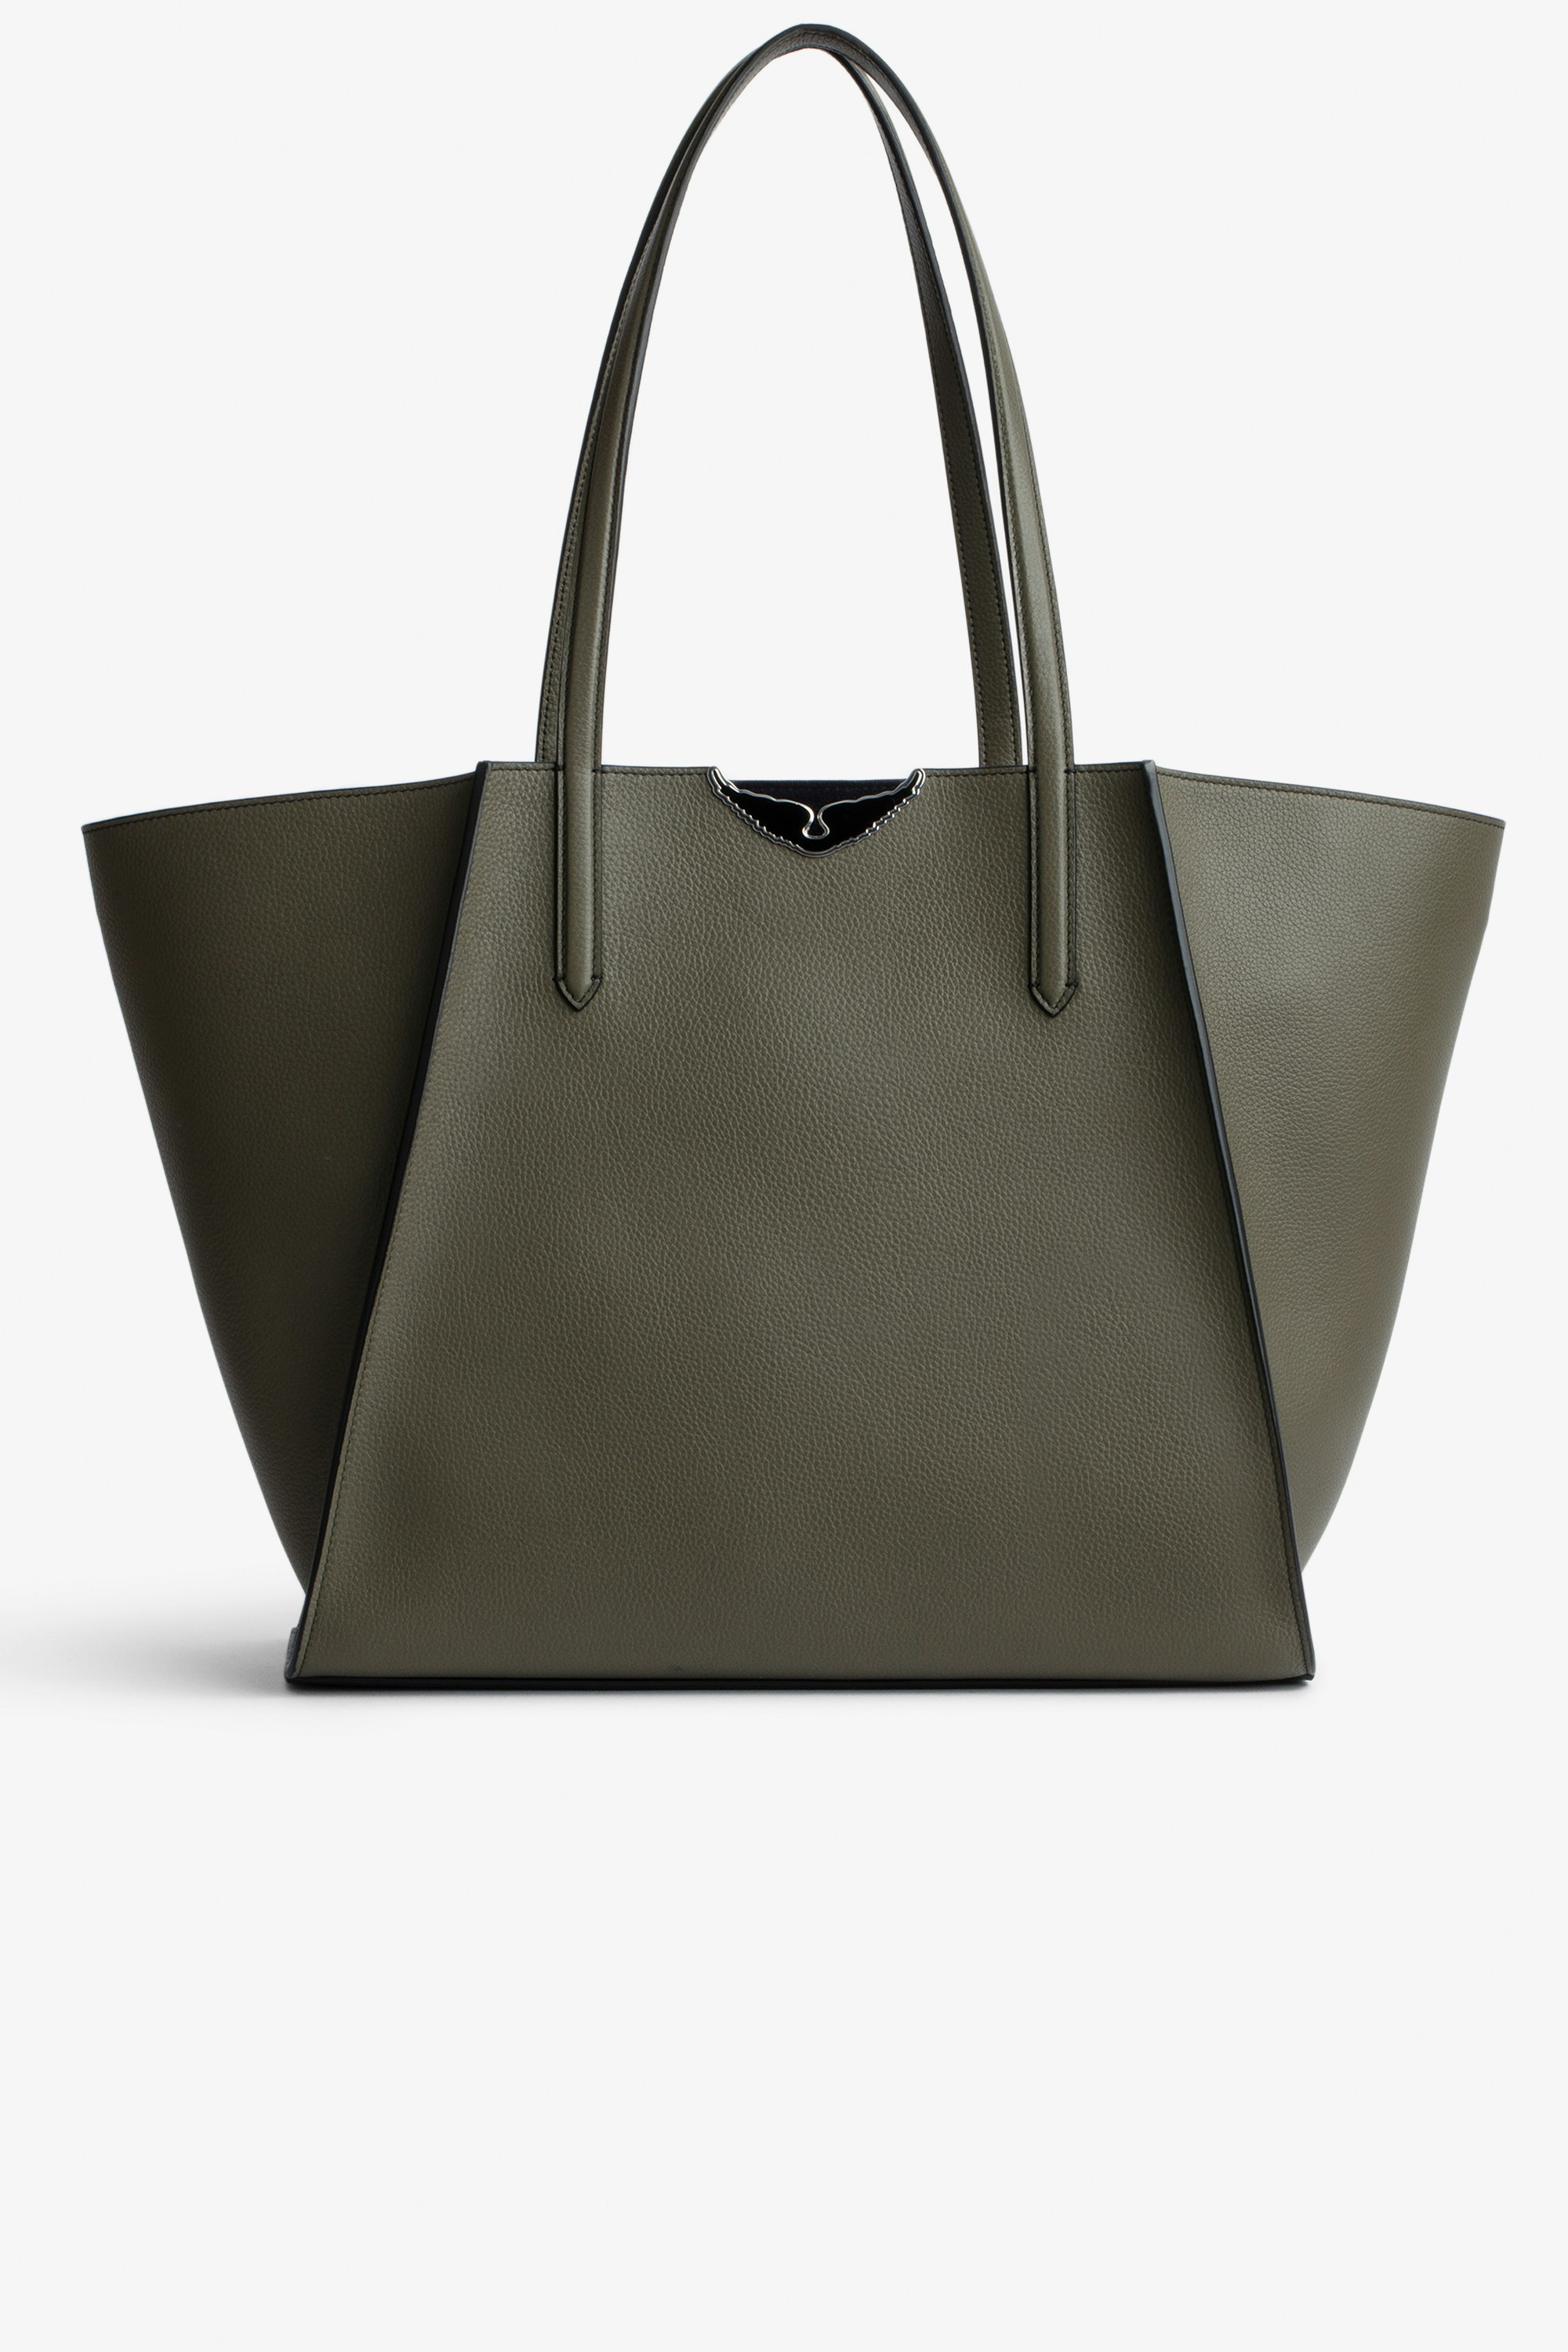 Le Borderline Bag Women's reversible tote bag in khaki grained leather and navy-blue suede with black lacquered wings.